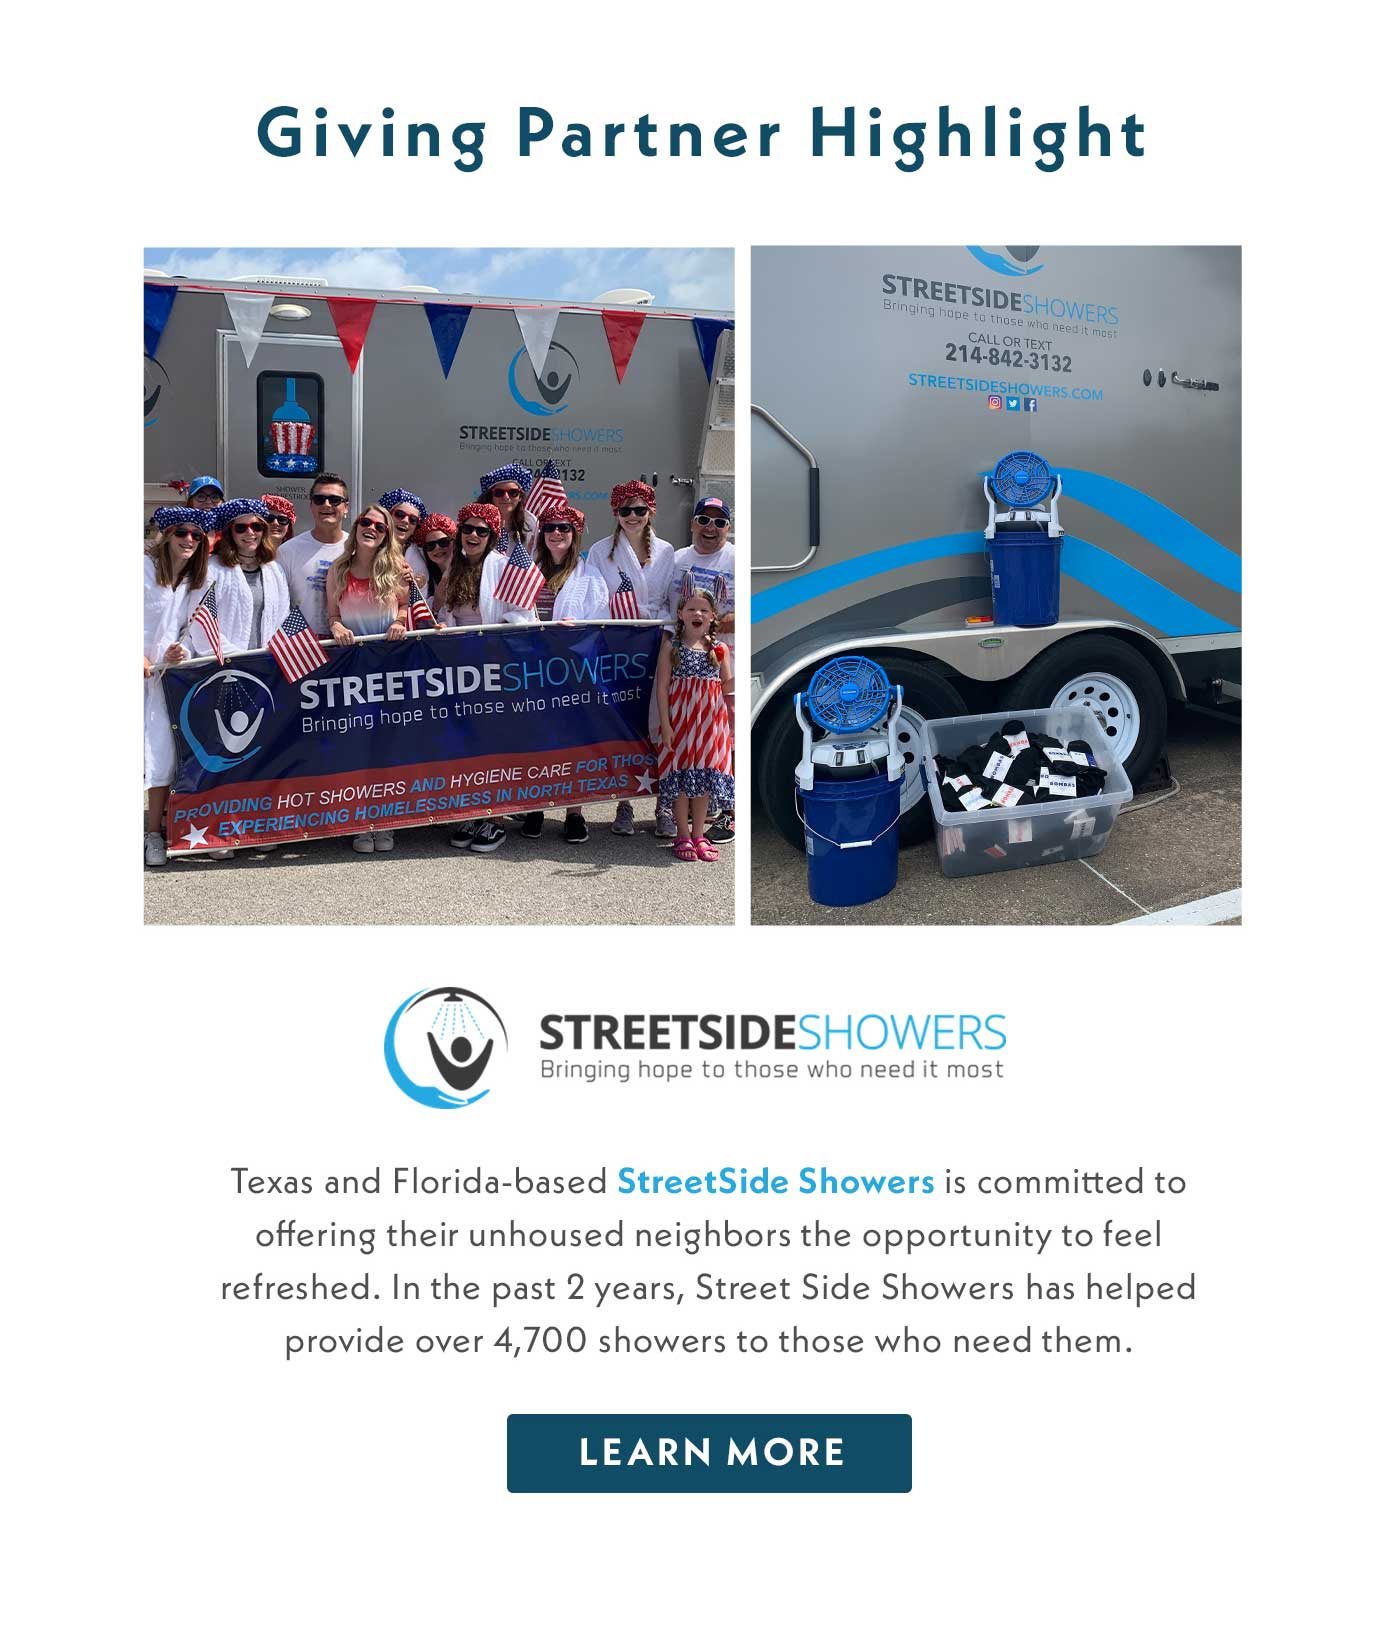 Giving Partner Highlight | Texas and Florida based StreetSide Showers is committed to offering their unhoused neighbors the opportunity to feel refreshed. In the past 2 years, Street Side Showers has helped provide over 4,700 showers to those who need them. Learn More.